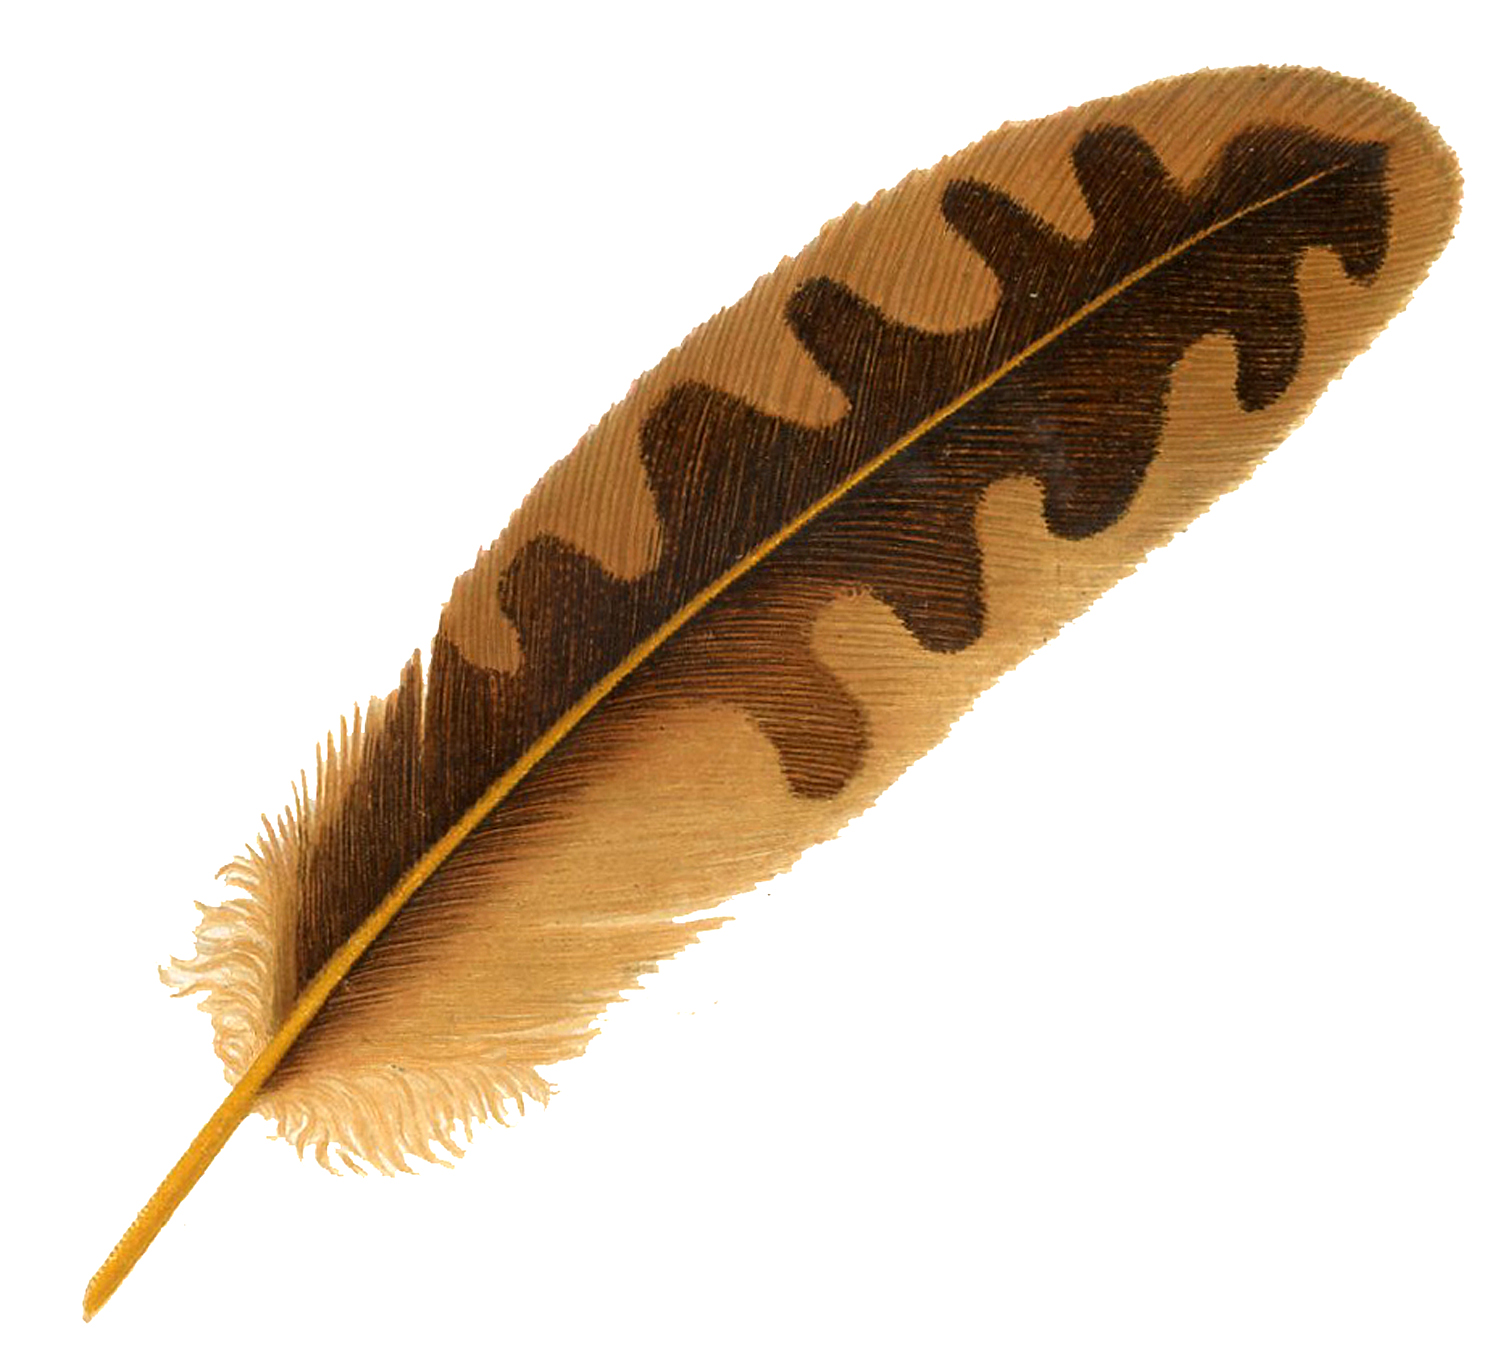 Vintage Feather Image - Brown - The Graphics Fairy